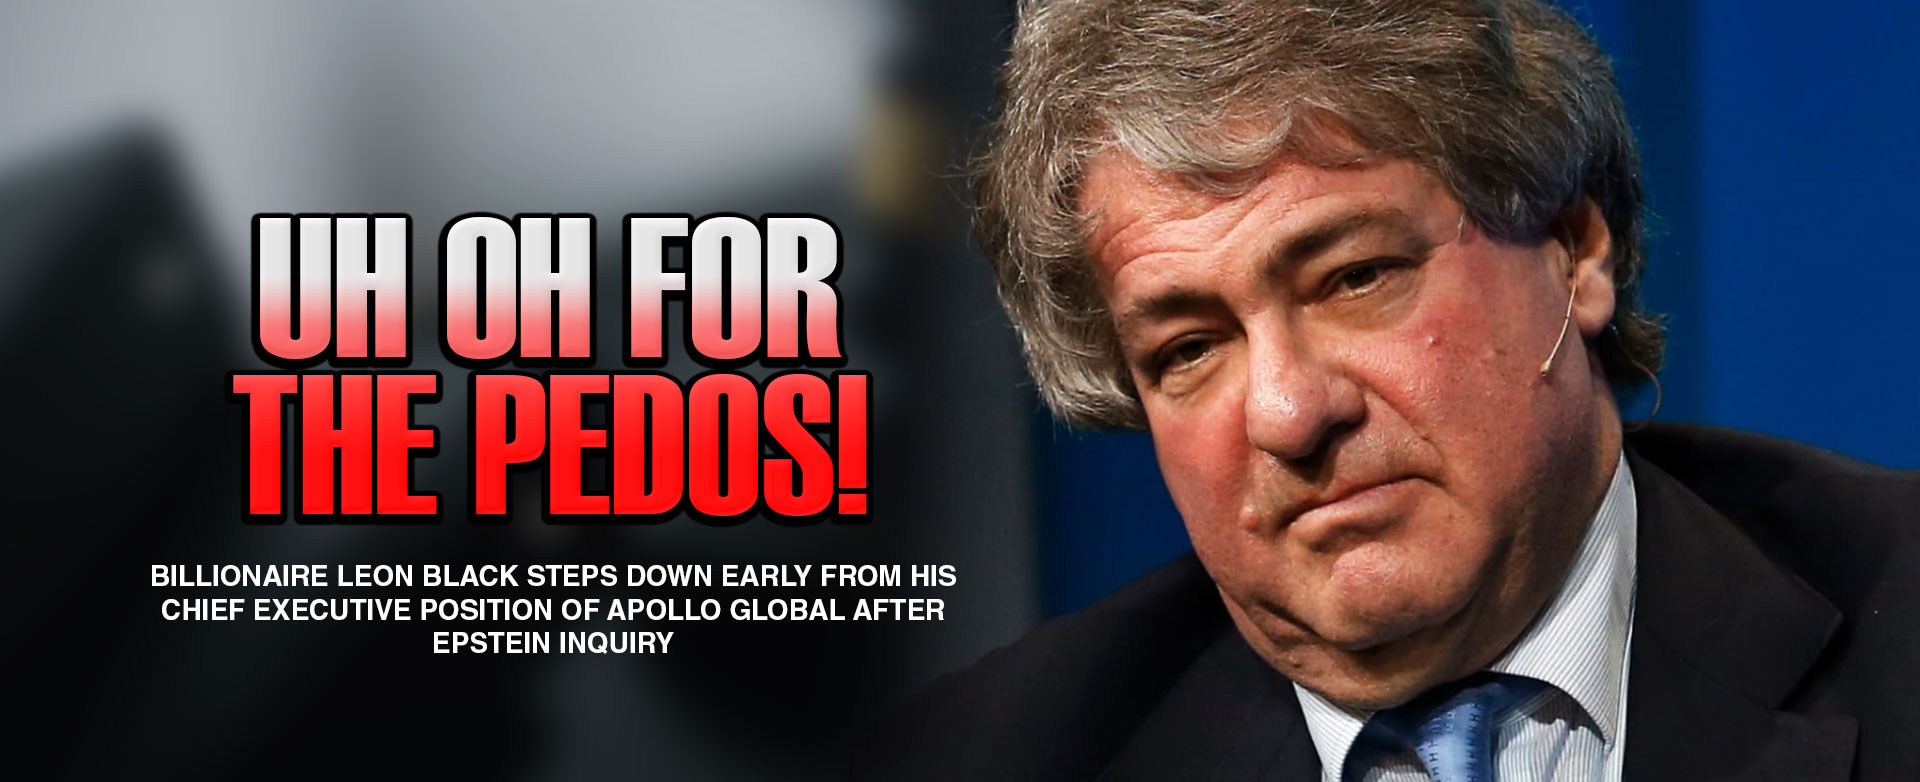 MyPatriotsNetwork-Billionaire Leon Black Steps Down Early From His Chief Executive Position Of Apollo Global After Epstein Inquiry